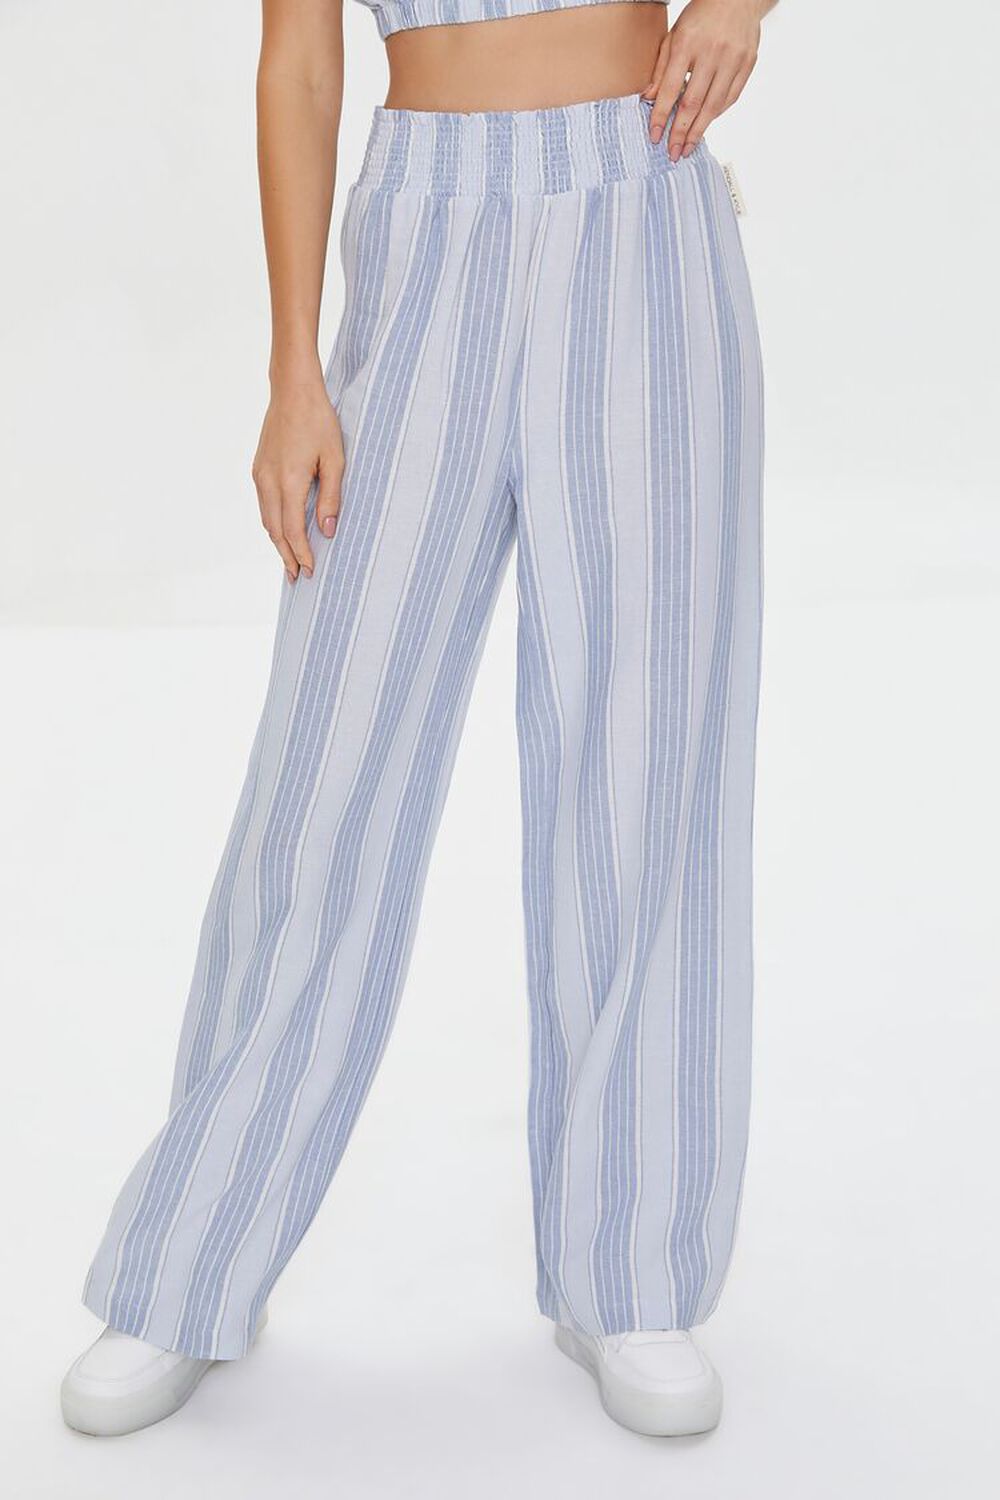 Kendall + Kylie Striped Pants